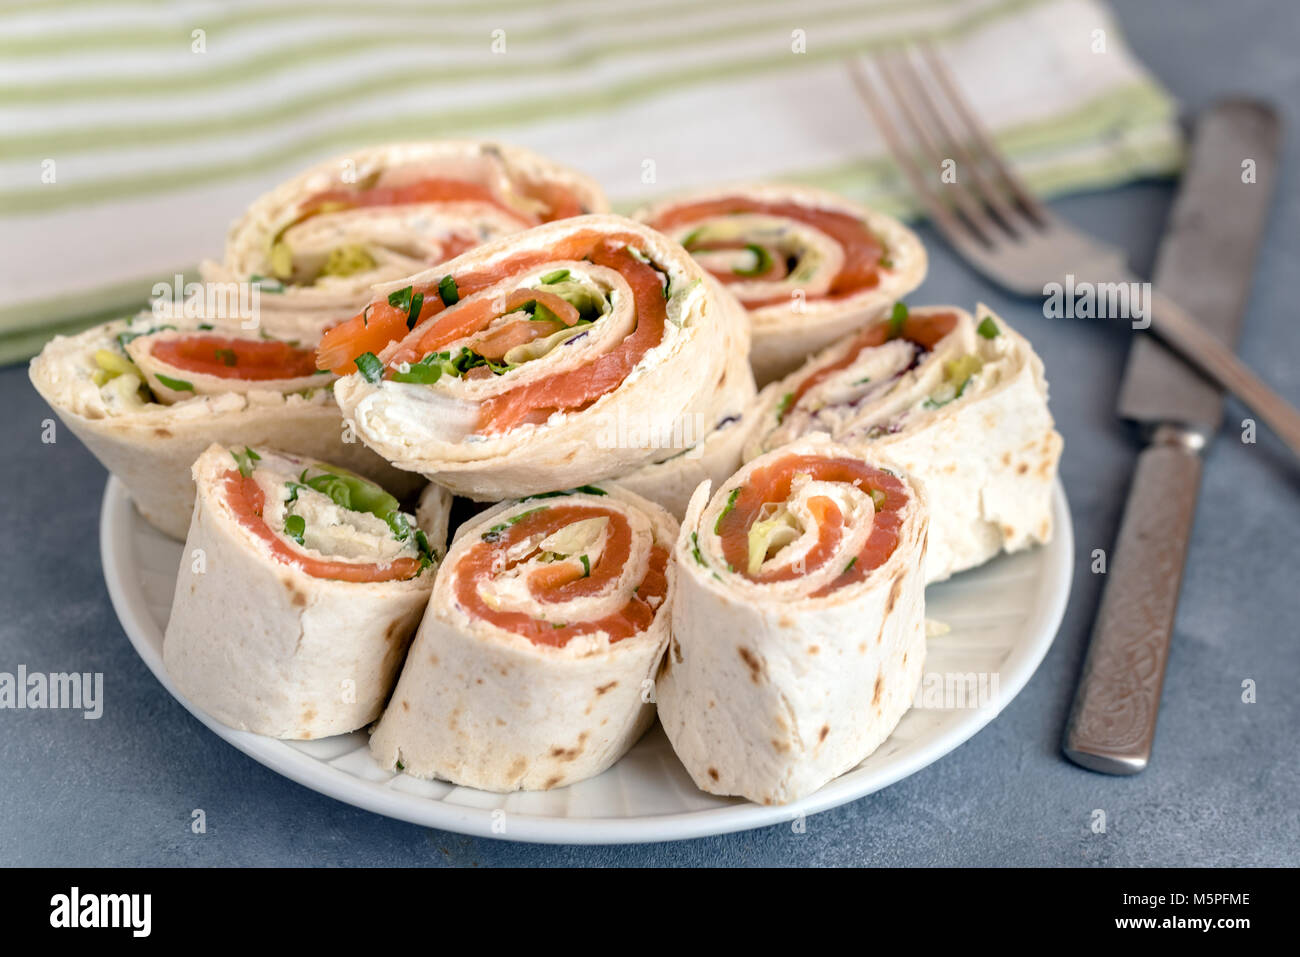 Rolls of thin pancakes with smoked salmon, cream cheese, chives and lettuce. Stock Photo